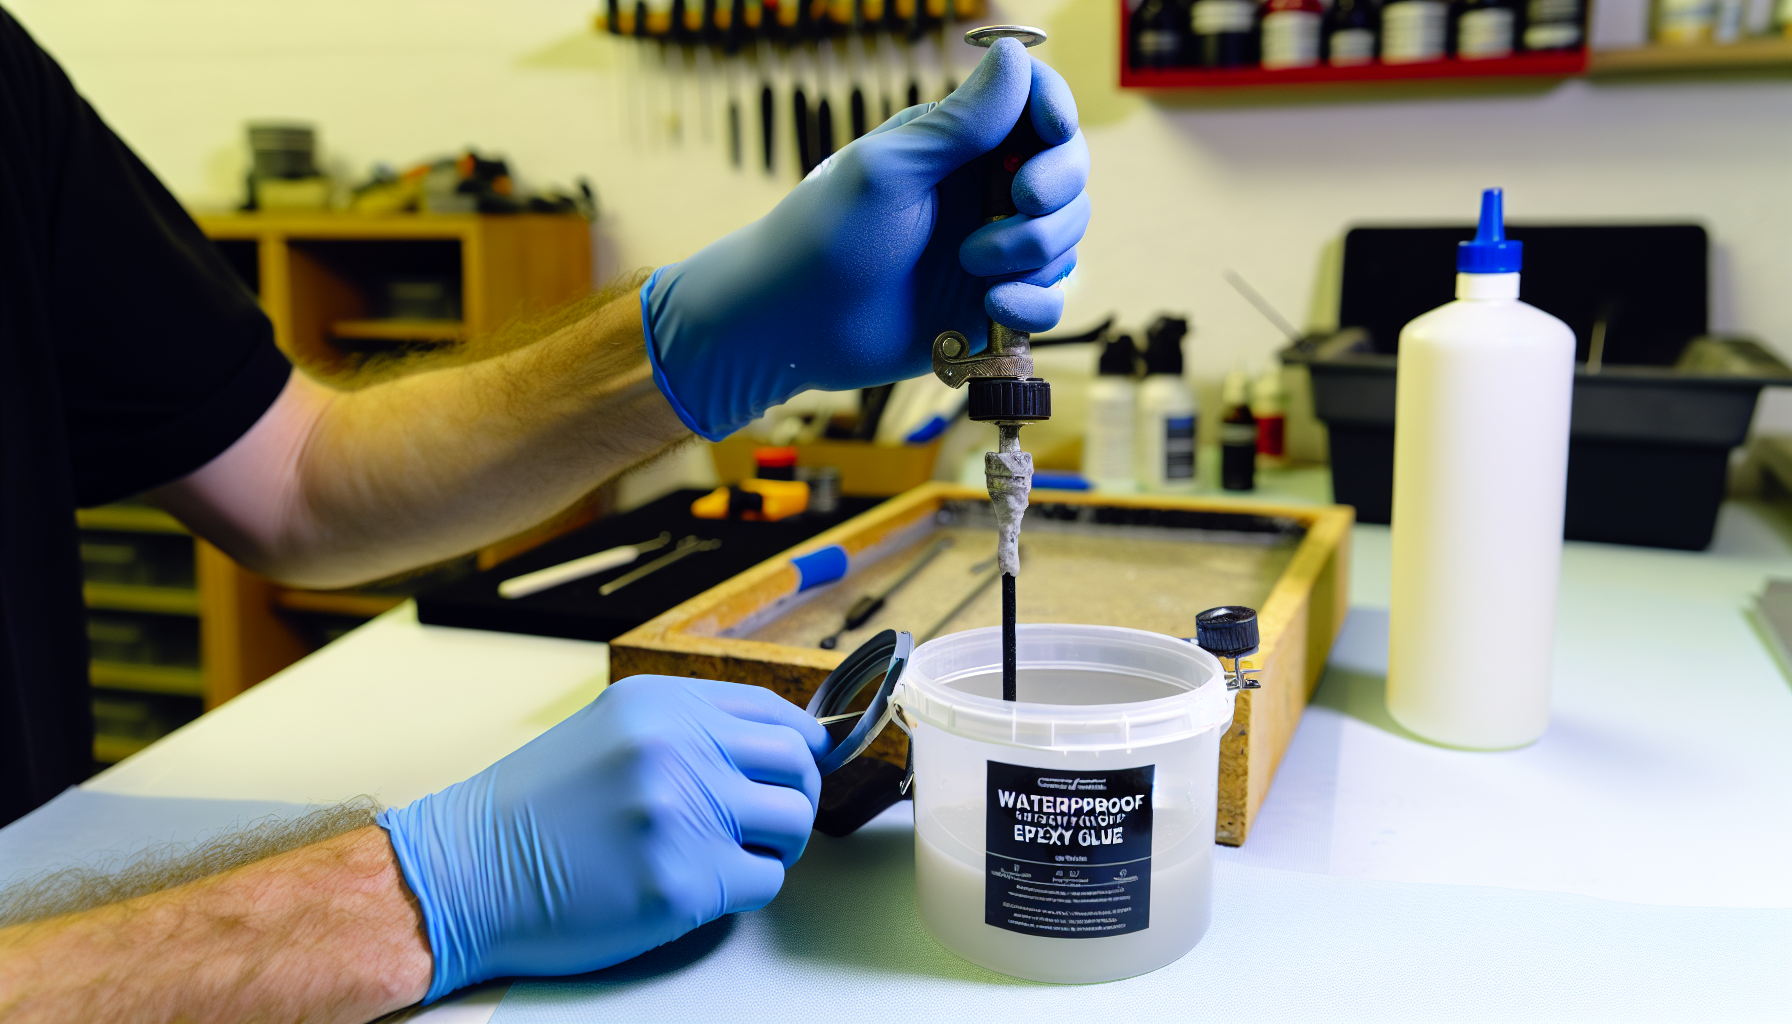 Mixing waterproof epoxy glue components in a container